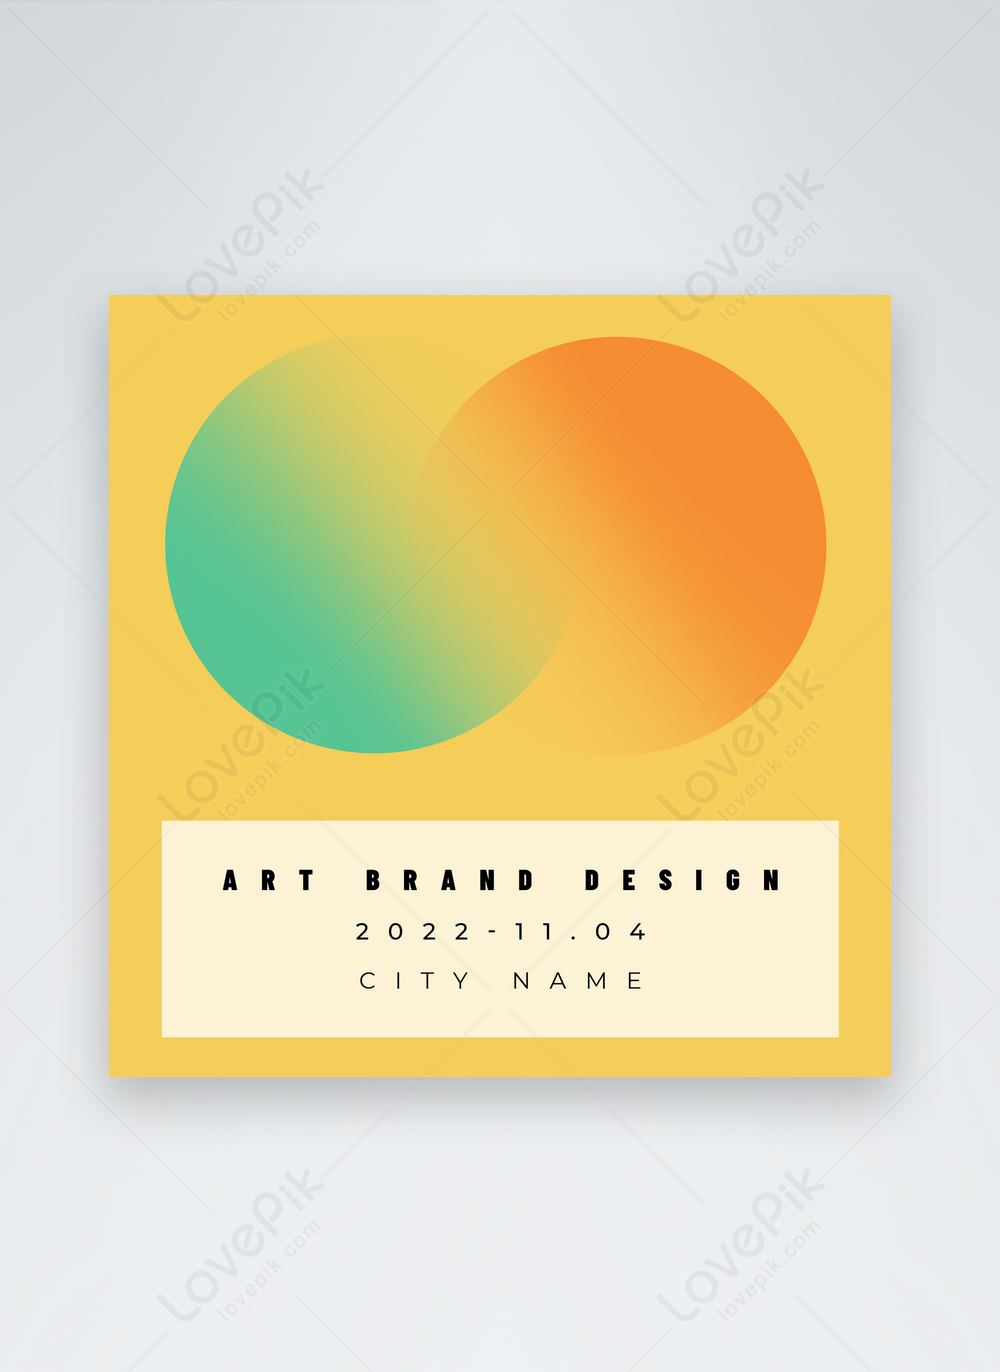 Round contrast orange green template image_picture free download ...